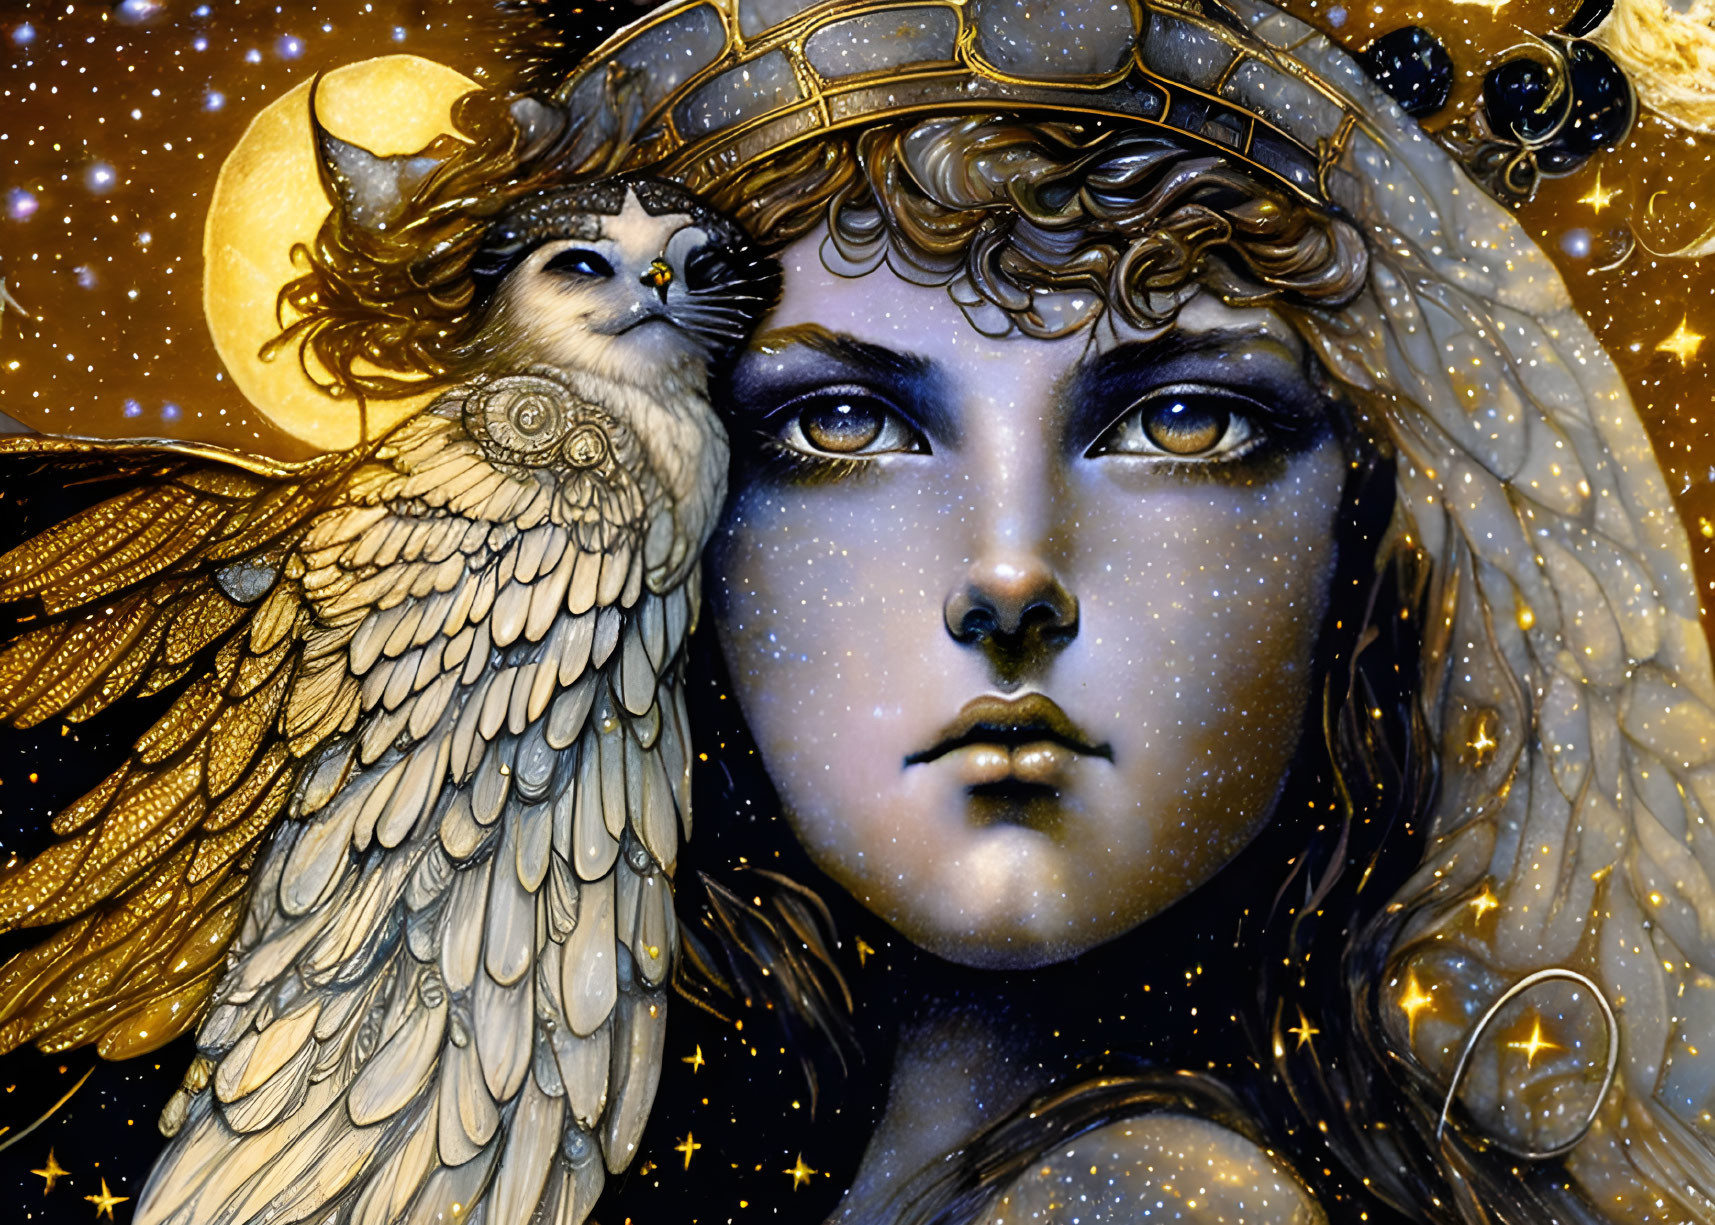 Detailed illustration of person with star-speckled skin, celestial helmet, owl, and cosmic backdrop.